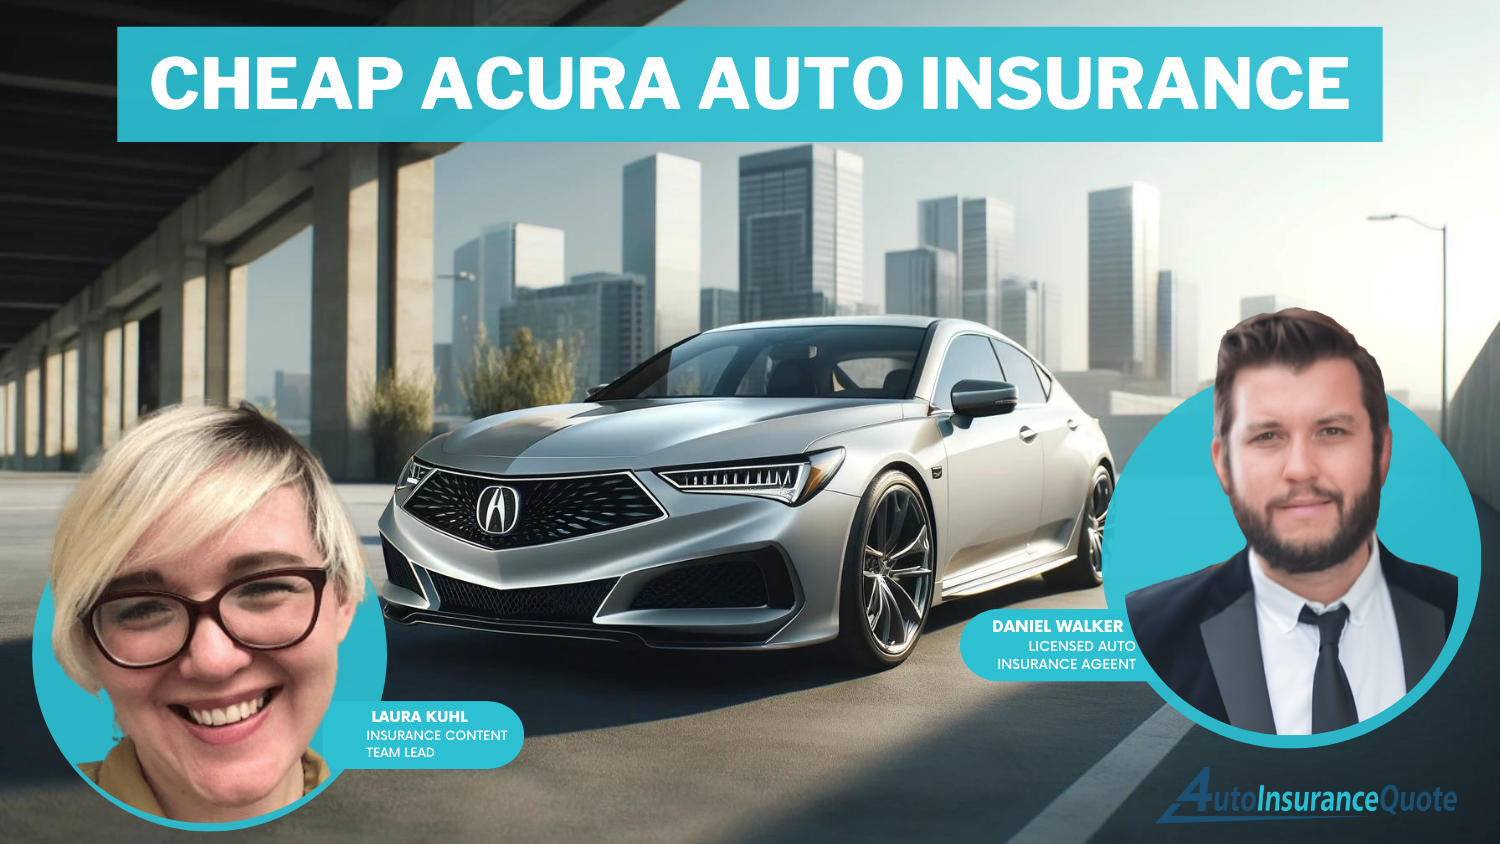 Cheap Acura Auto Insurance: Farmers, Erie, and Travelers